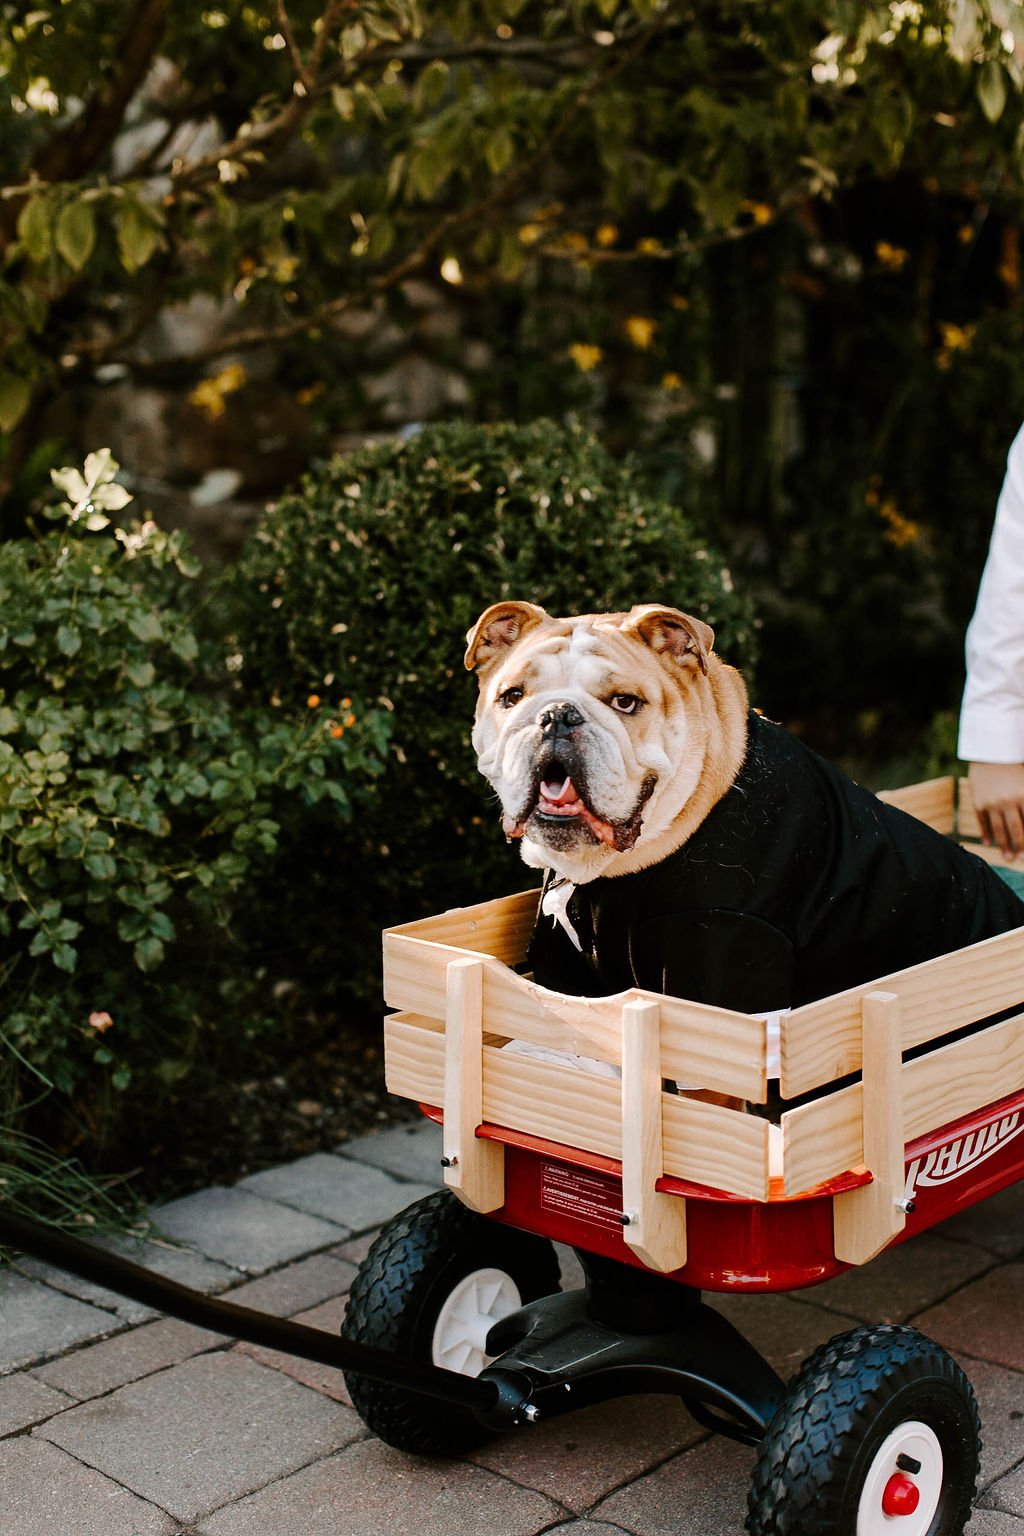 French bulldog in a suite getting pushed down wedding aisle in a wooden cart